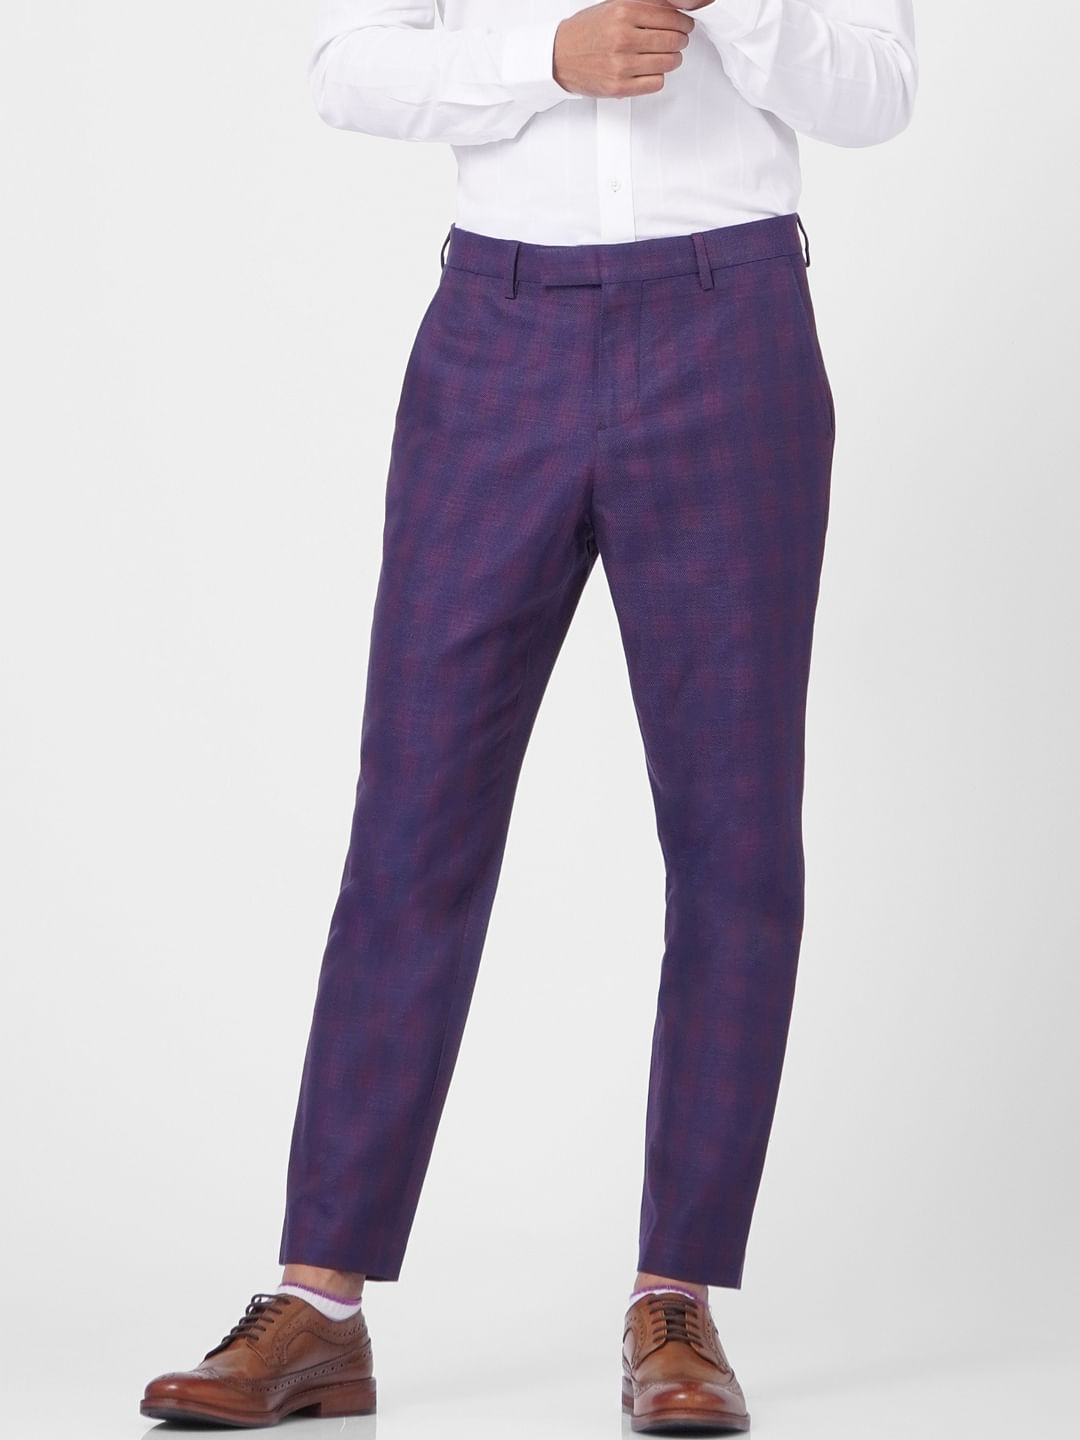 Share 141+ mens formal check trousers best